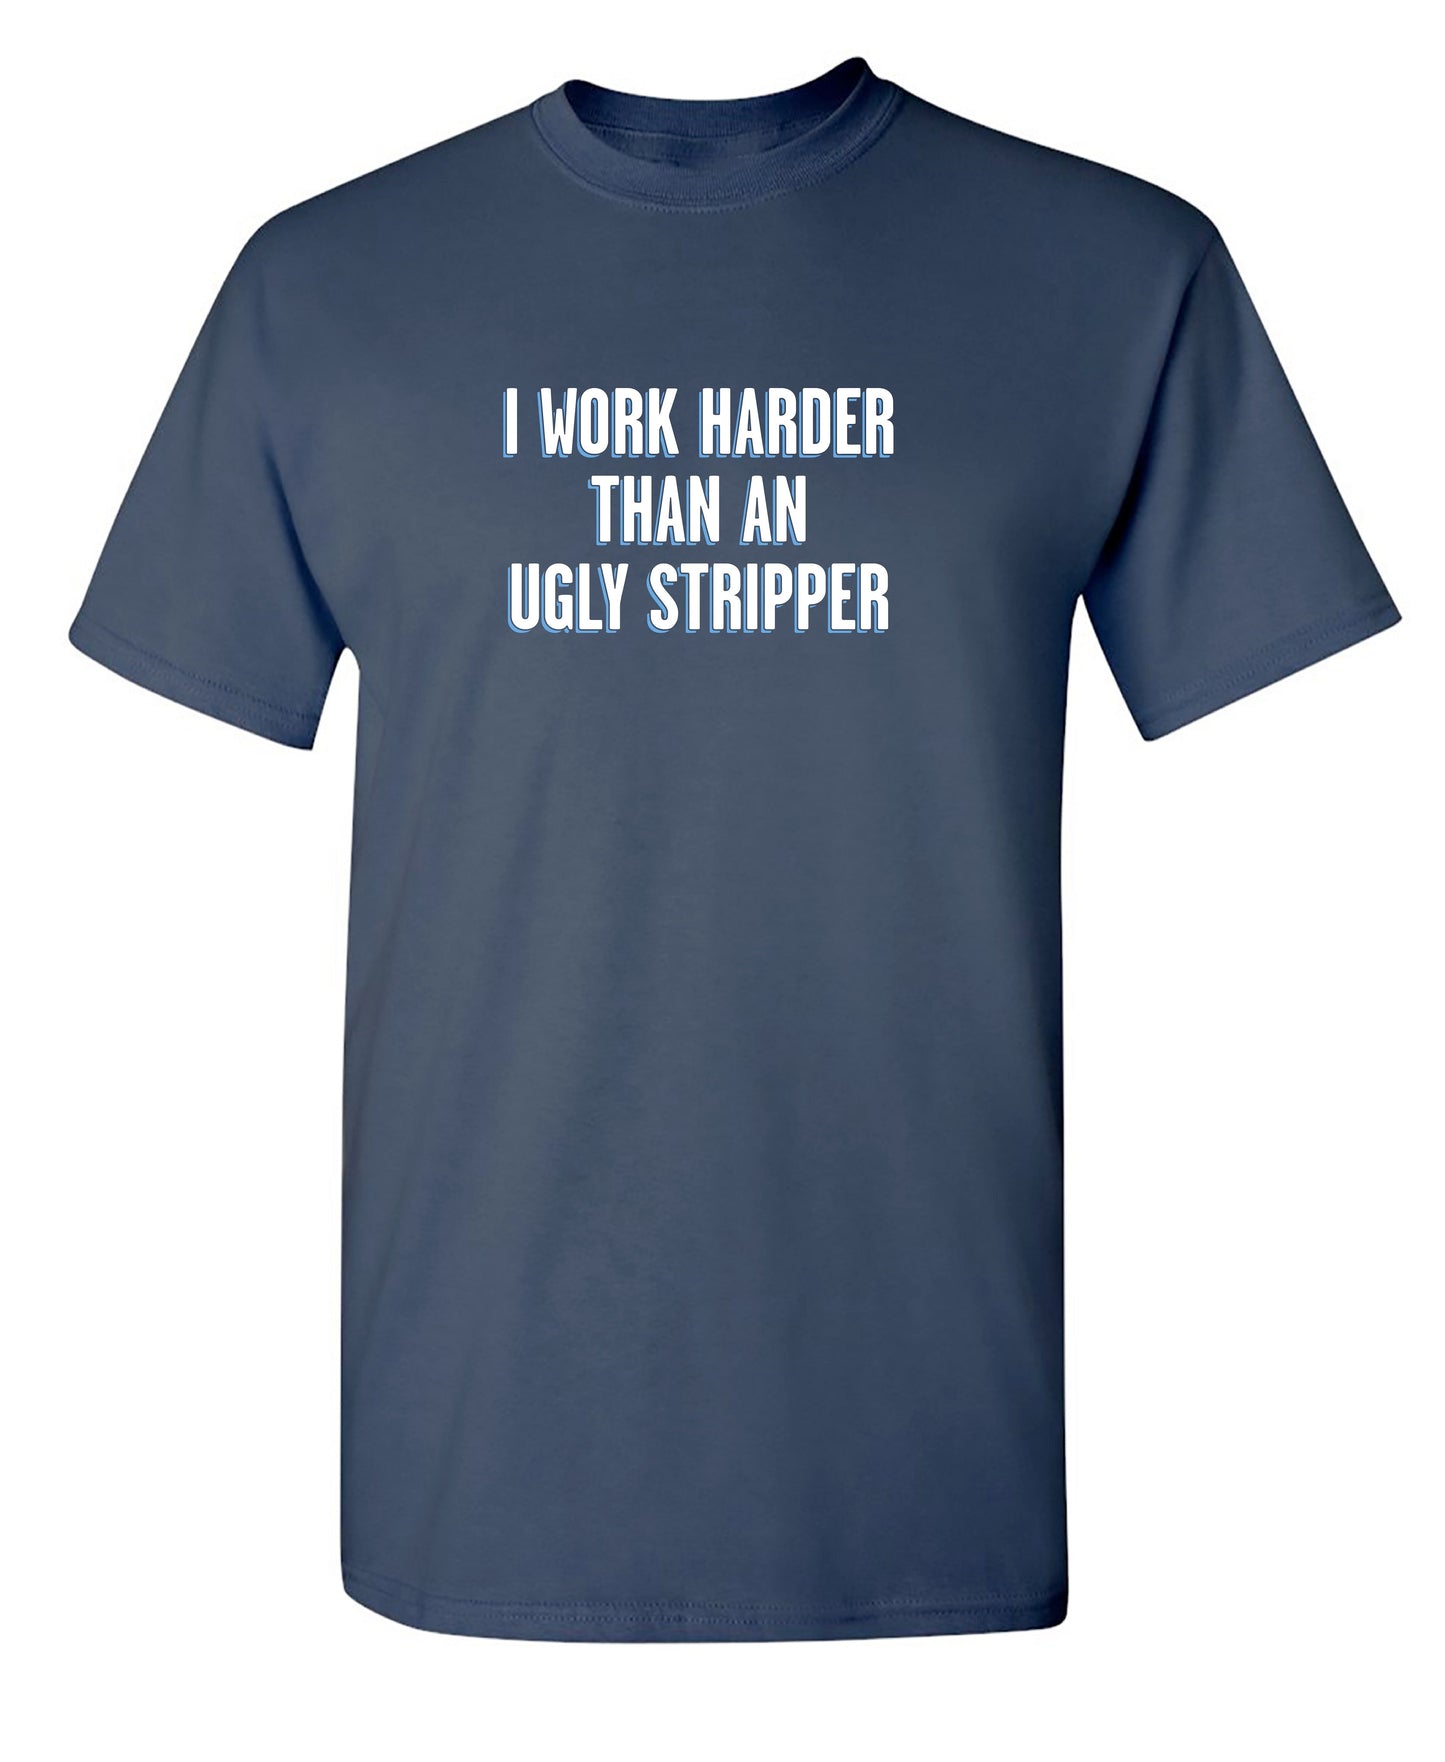 I Work Harder Than An Ugly Stripper - Funny T Shirts & Graphic Tees